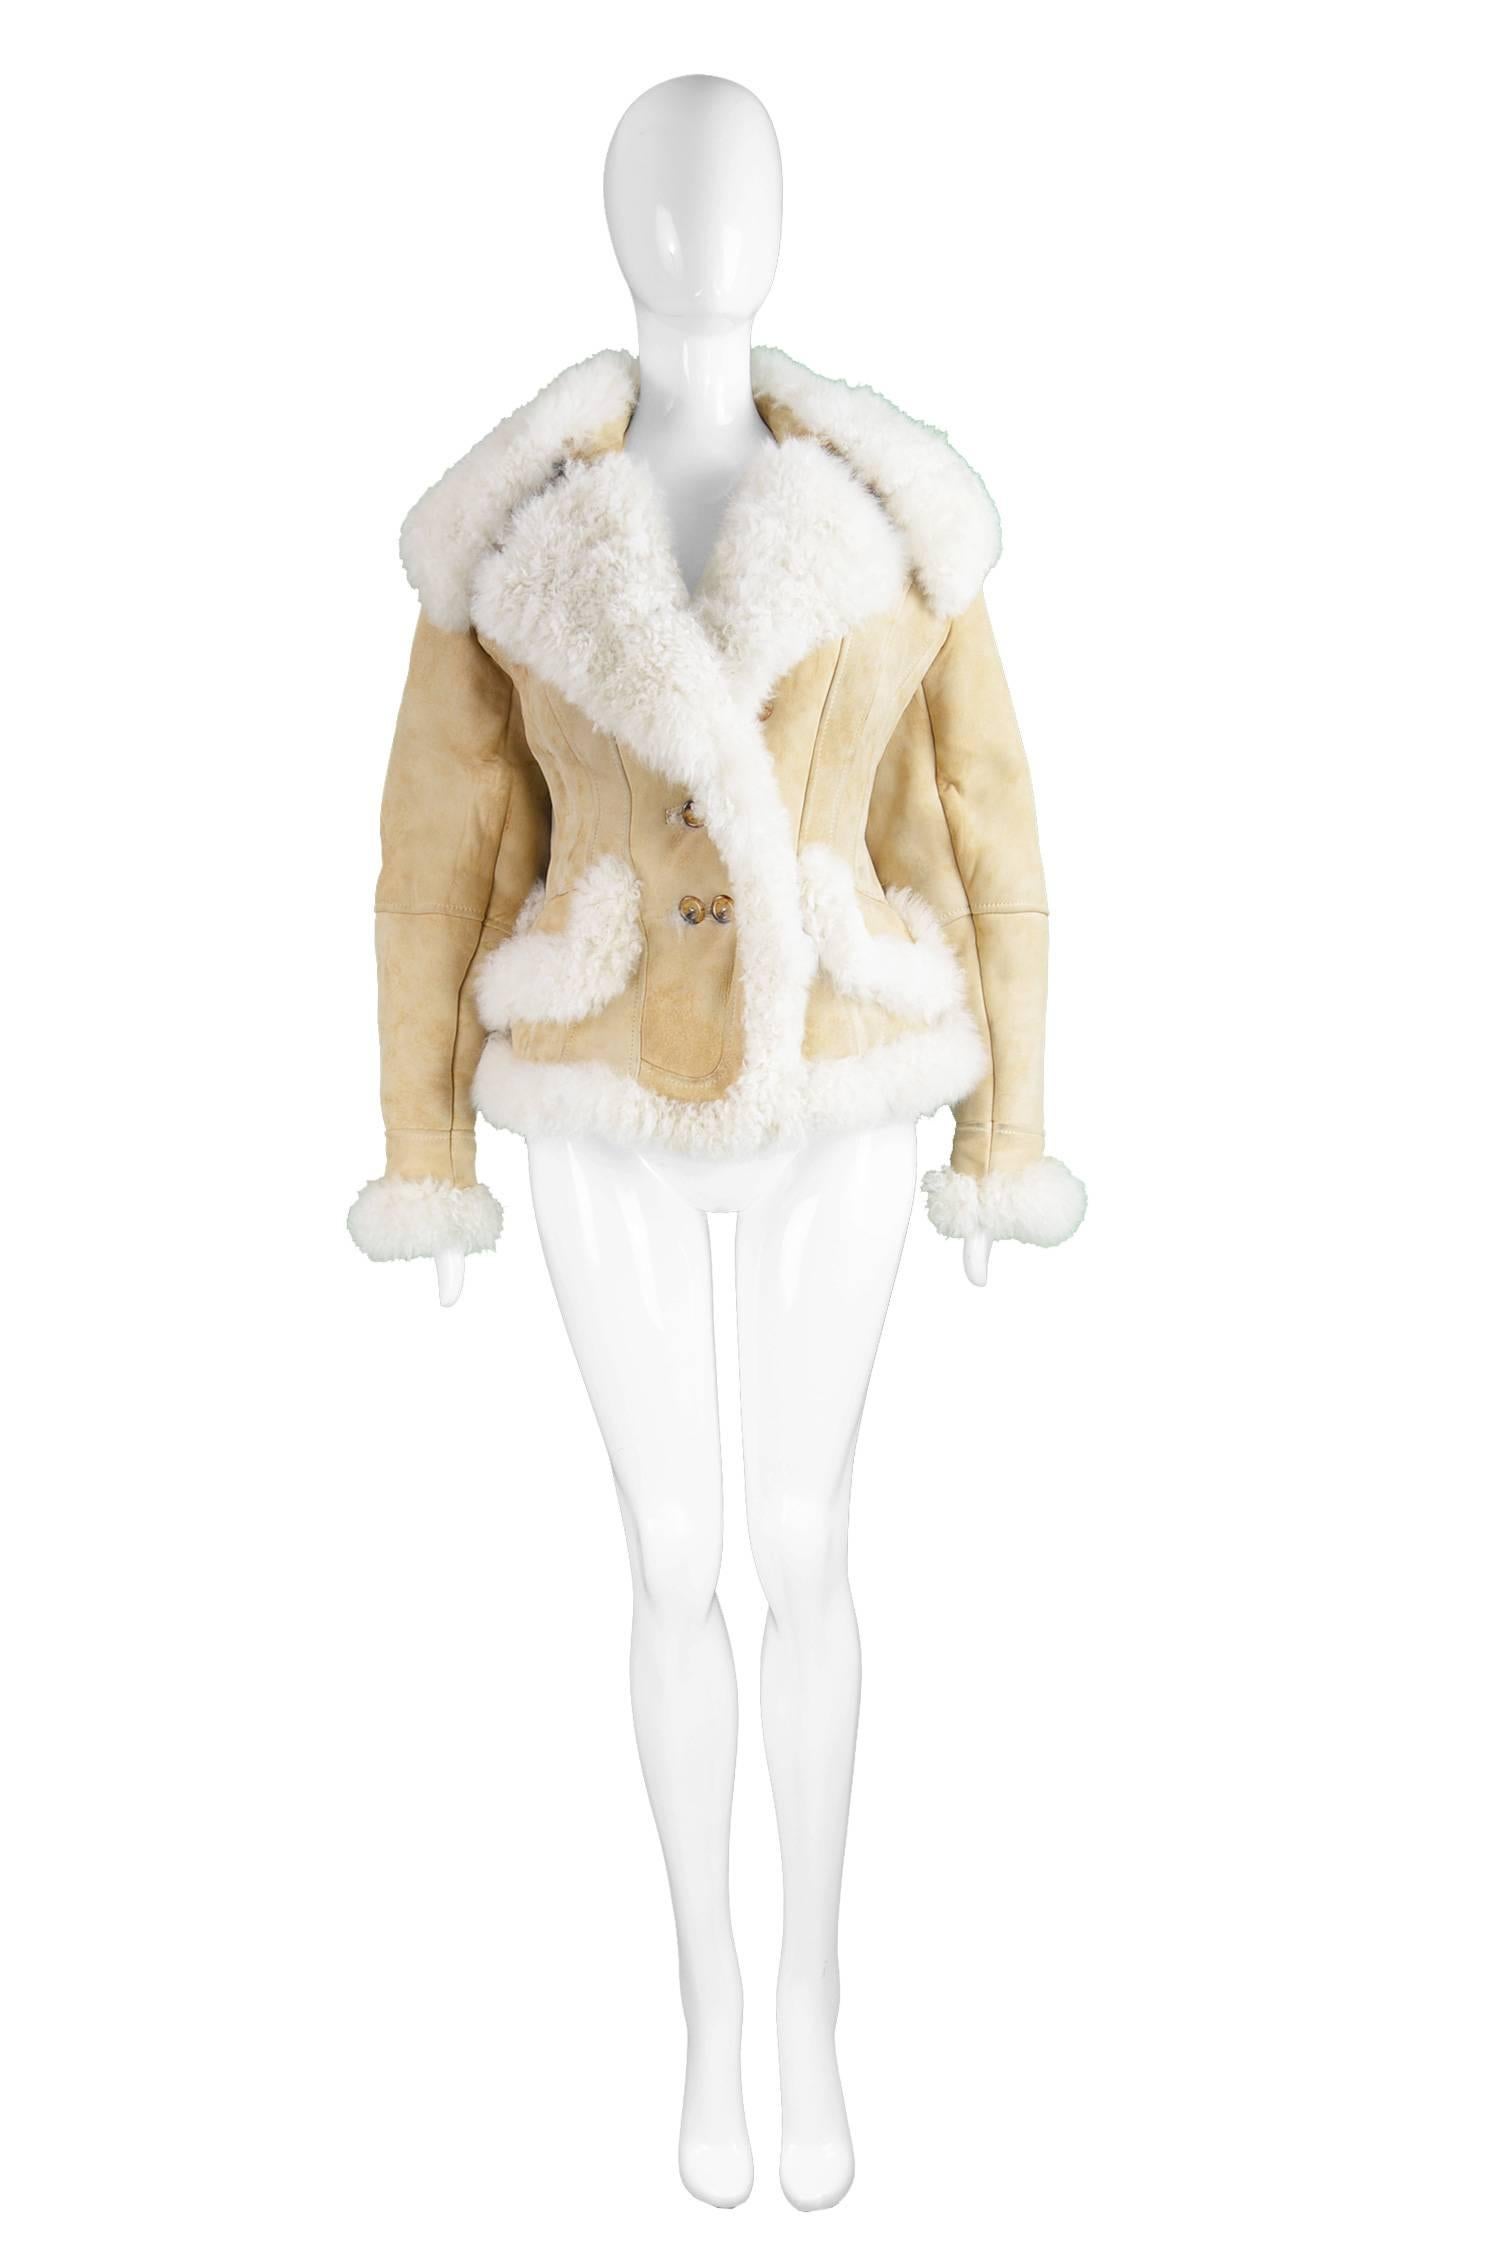 Gianfranco Ferre Women's Vintage Fitted Mongolian Lamb Shearling Trim Jacket, 1990s

Estimated Size: UK 10/ US 6/ EU 38. Please check measurements. 
Bust - 38” / 96cm (please allow roughly 4inch room for movement and thickness of coat)
Waist - 34” /